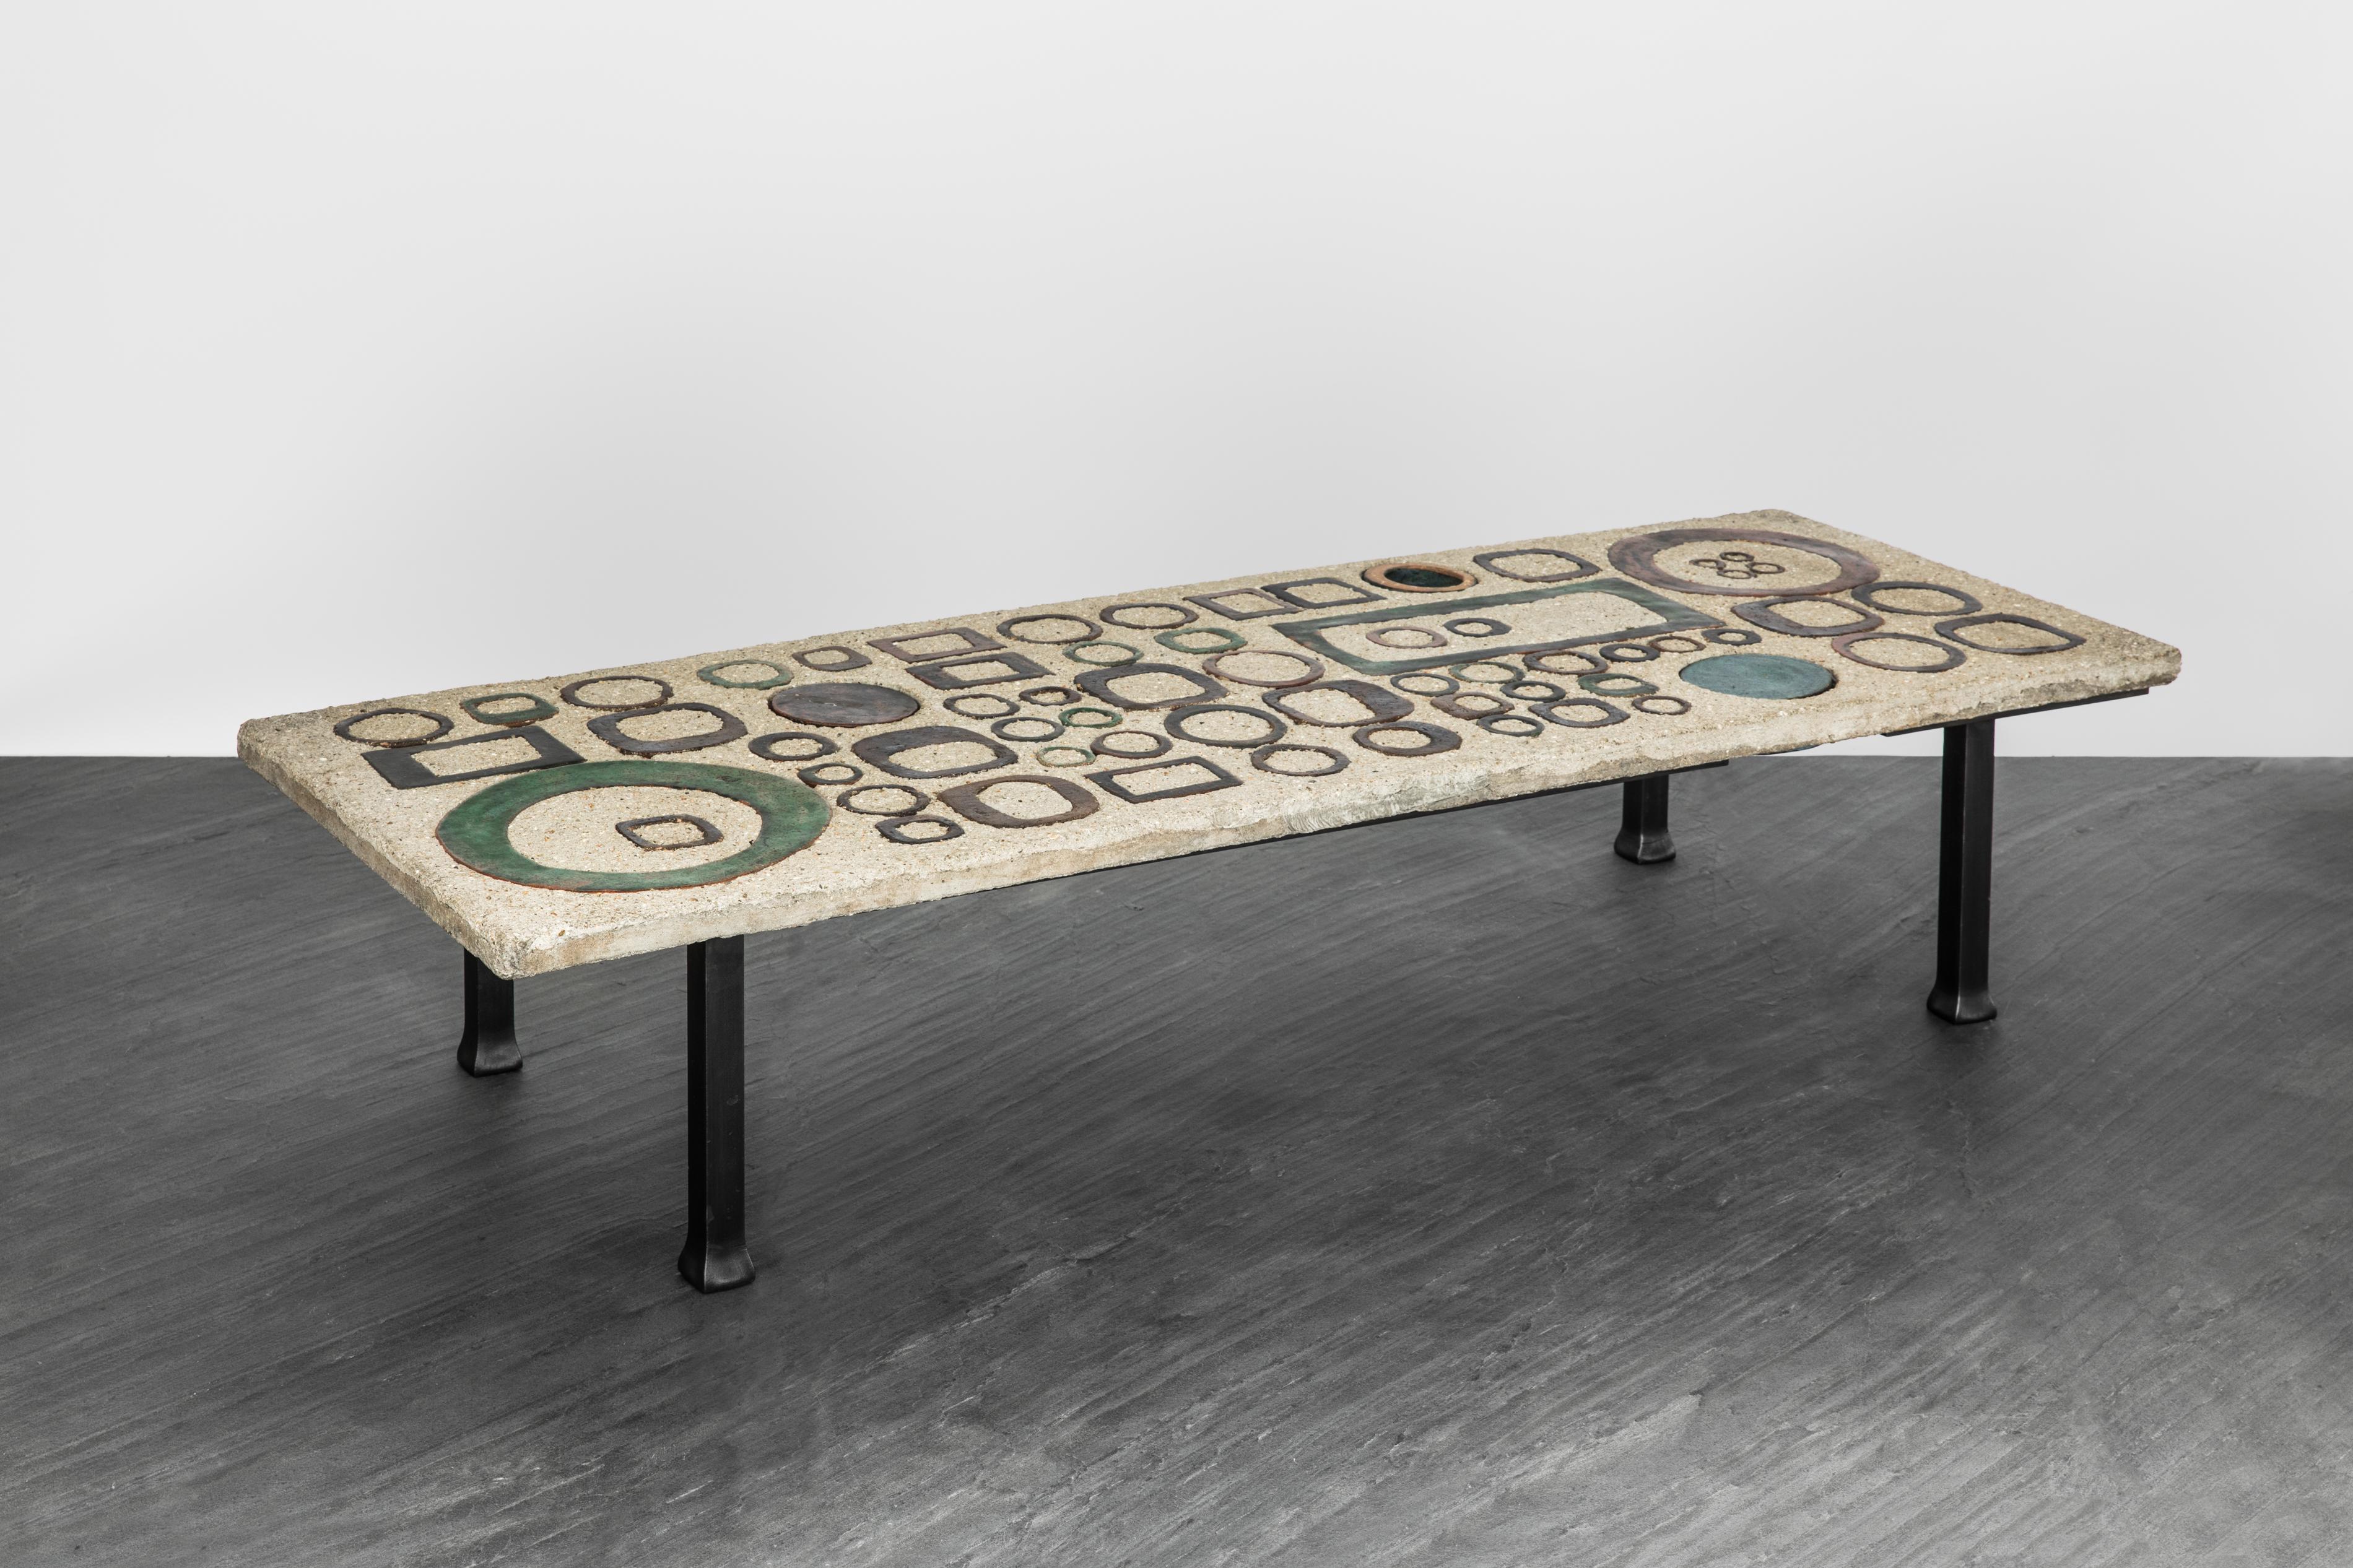 Hand-Carved 20th Century Modern Concrete and Ceramic Coffee Table by Andrée & Michel Hirlet For Sale